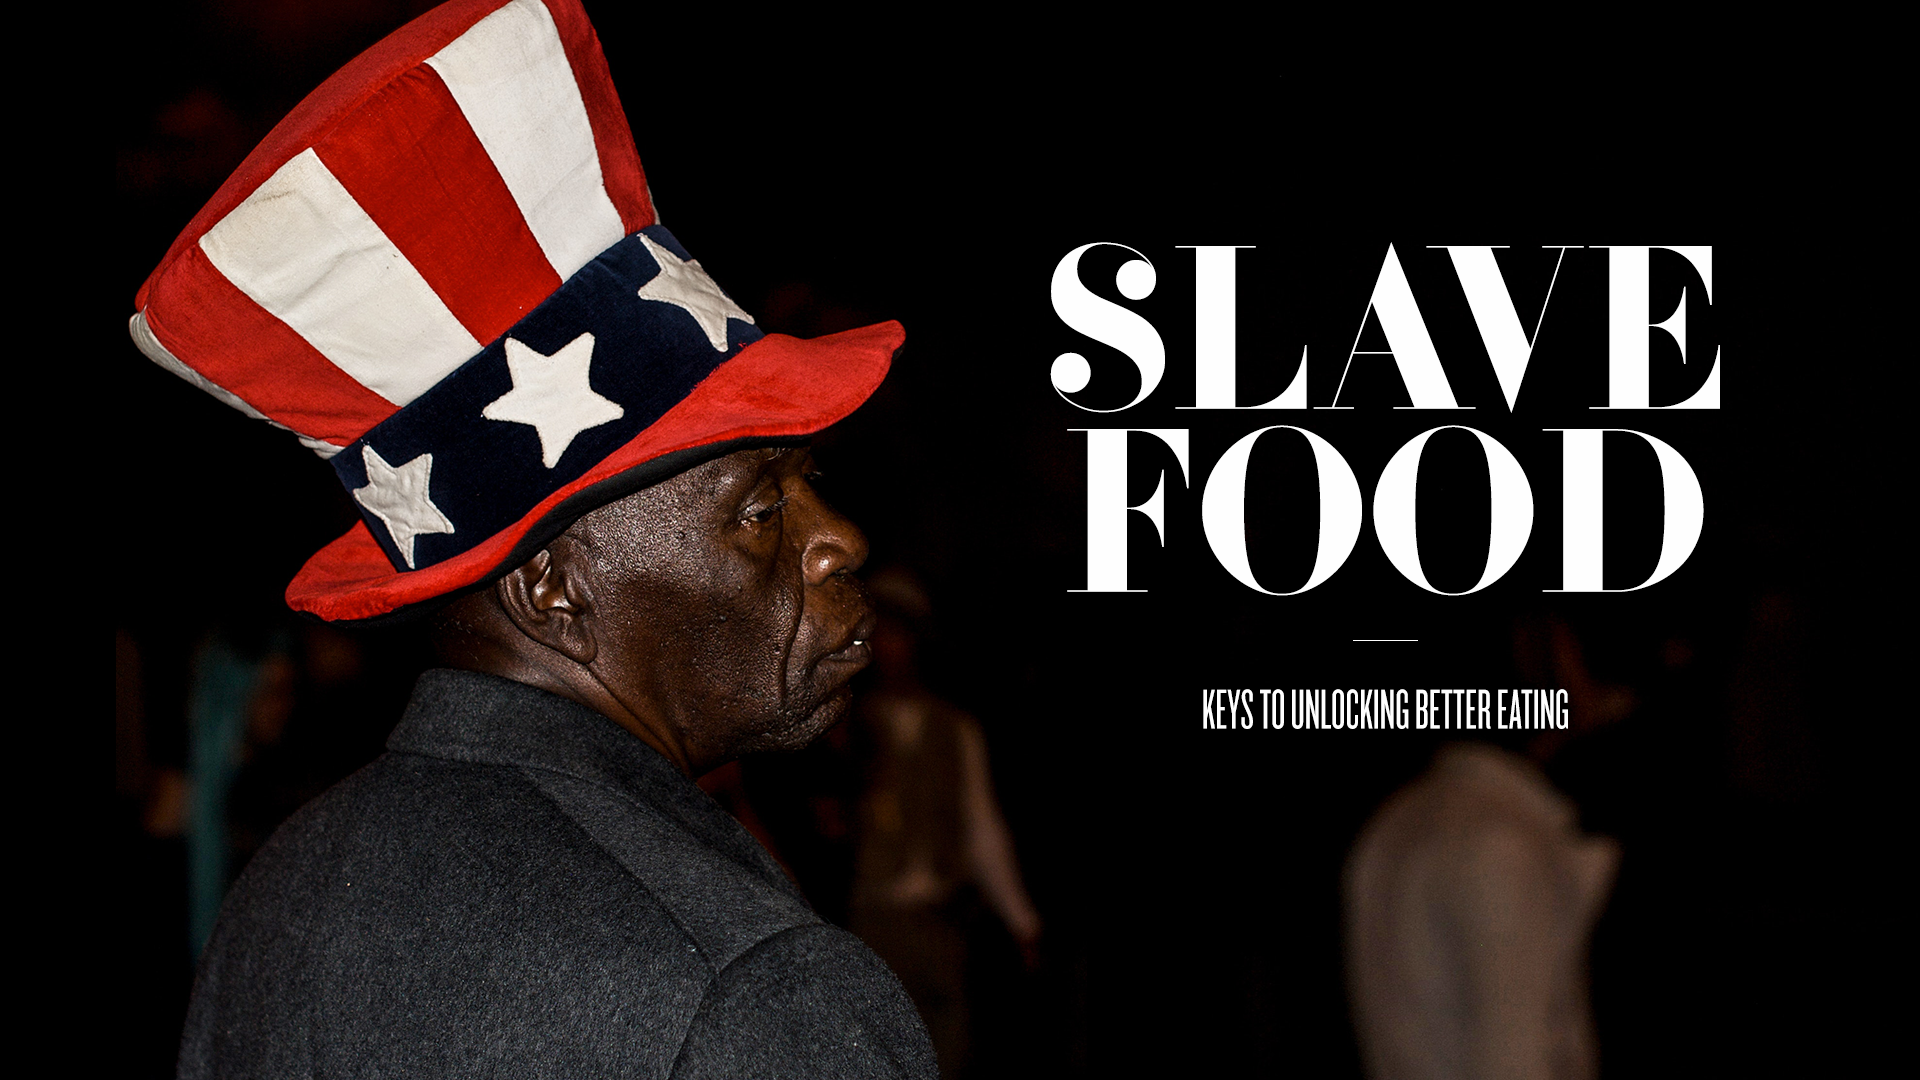 The Slave Food Project